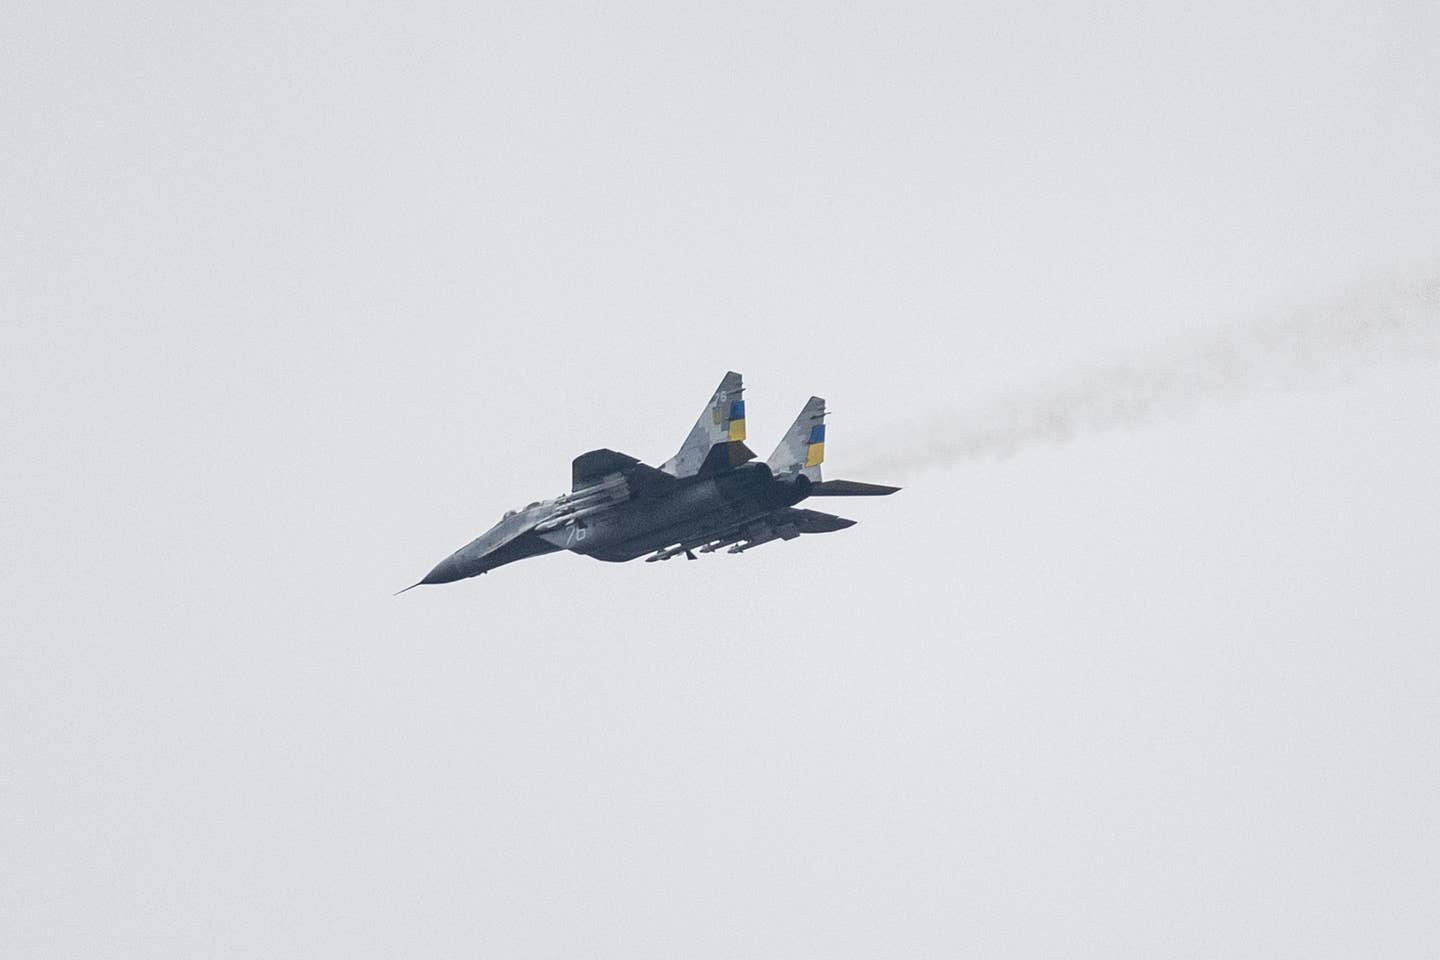 A Ukrainian Air Force MiG-29 flying over eastern Ukraine with a full air-to-air missile load-out, on January 1, 2023. <em>Photo by SAMEER AL-DOUMY/AFP via Getty Images</em>